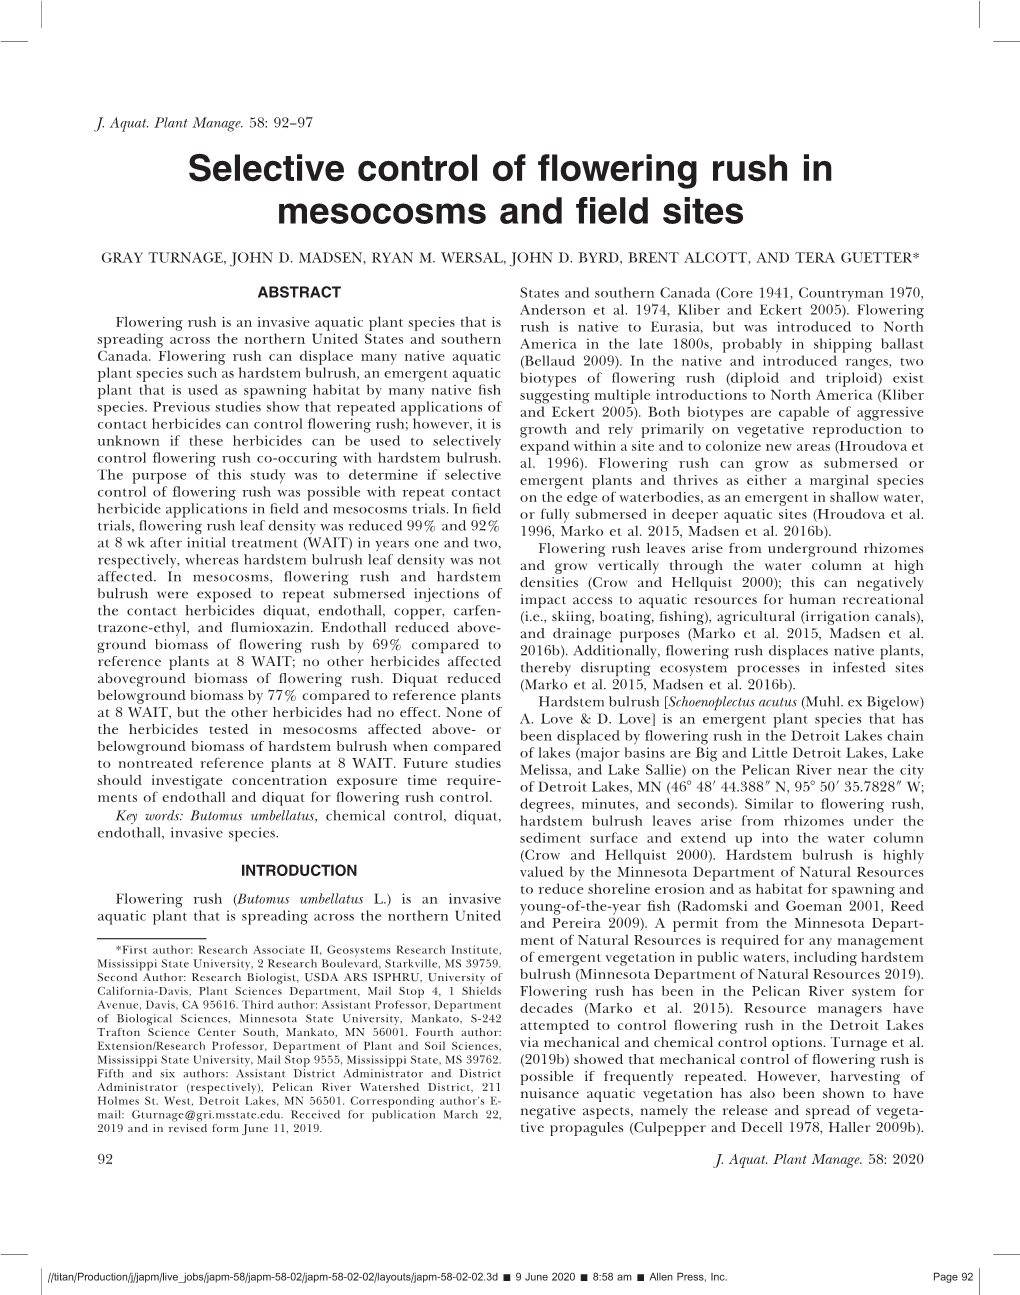 Selective Control of Flowering Rush in Mesocosms and Field Sites